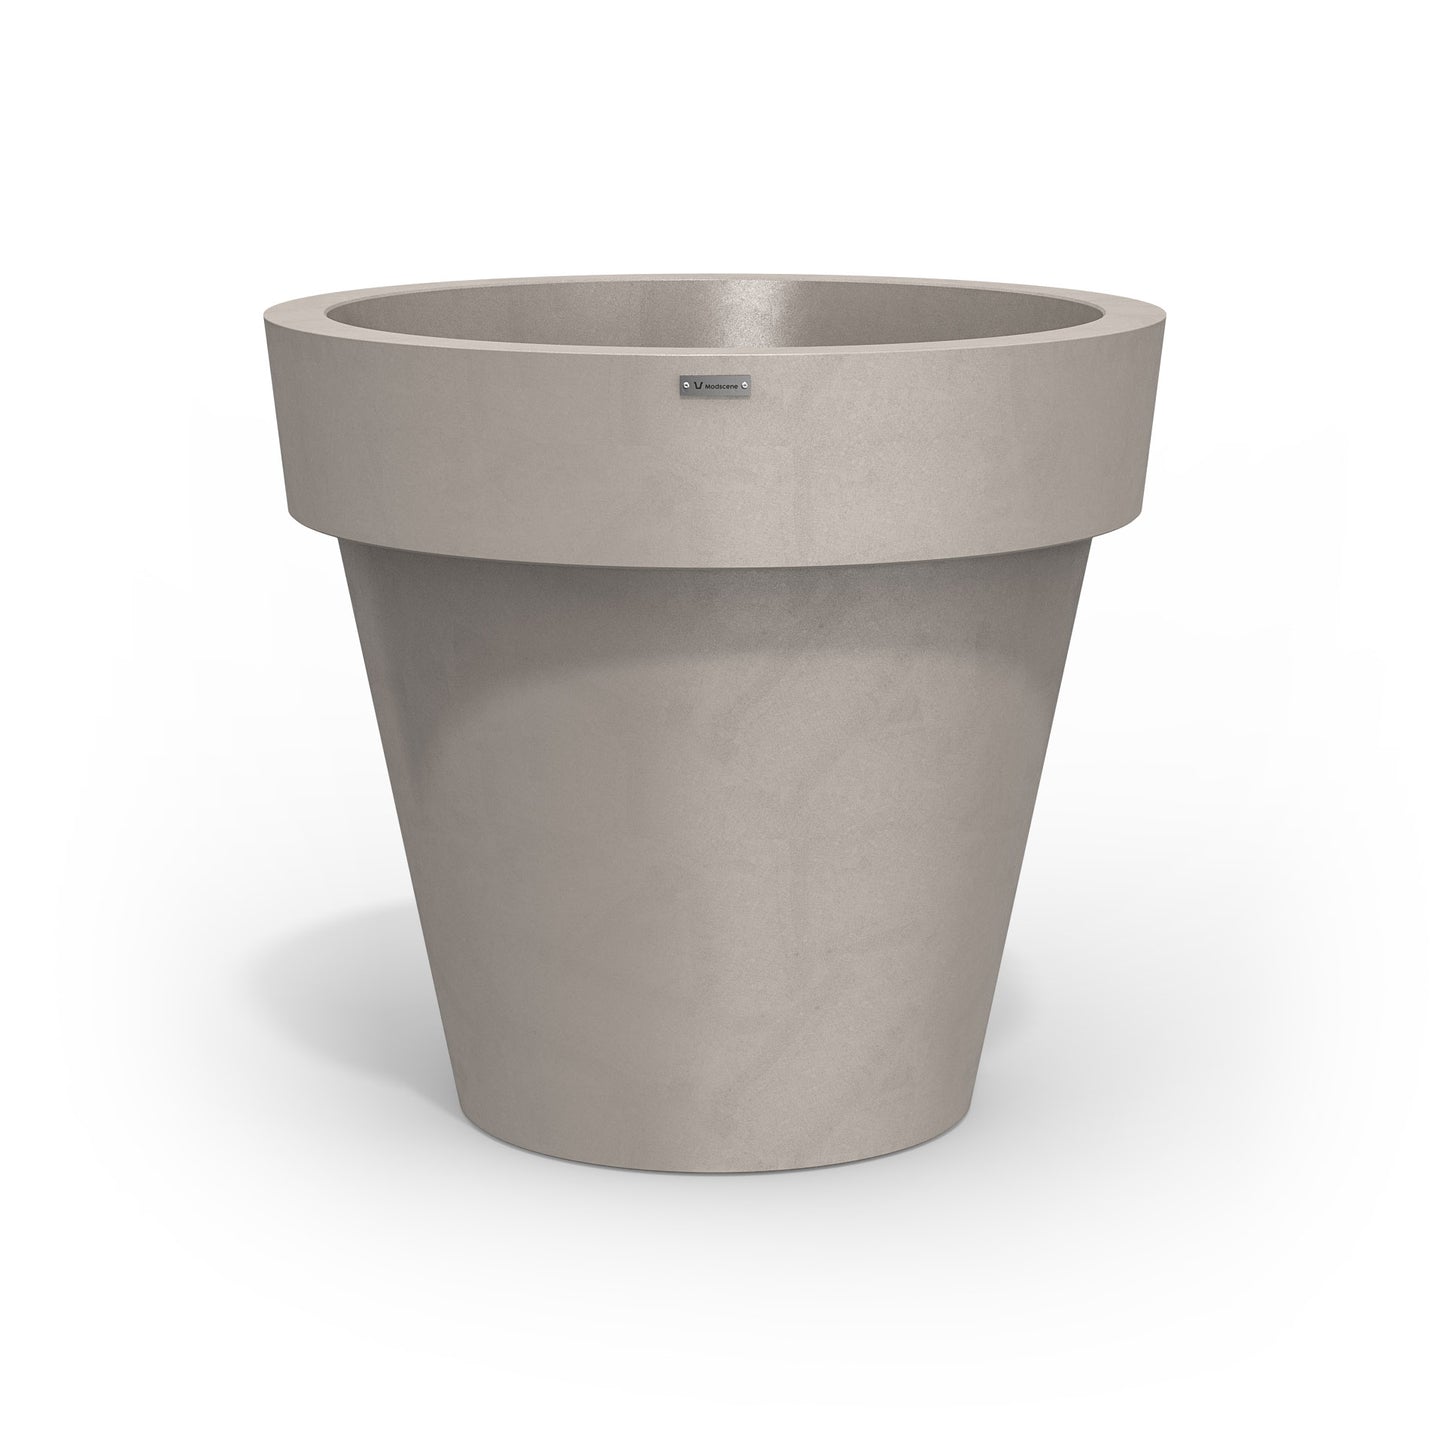 Large Modscene planter pot in a light grey colour with a concrete look finish.